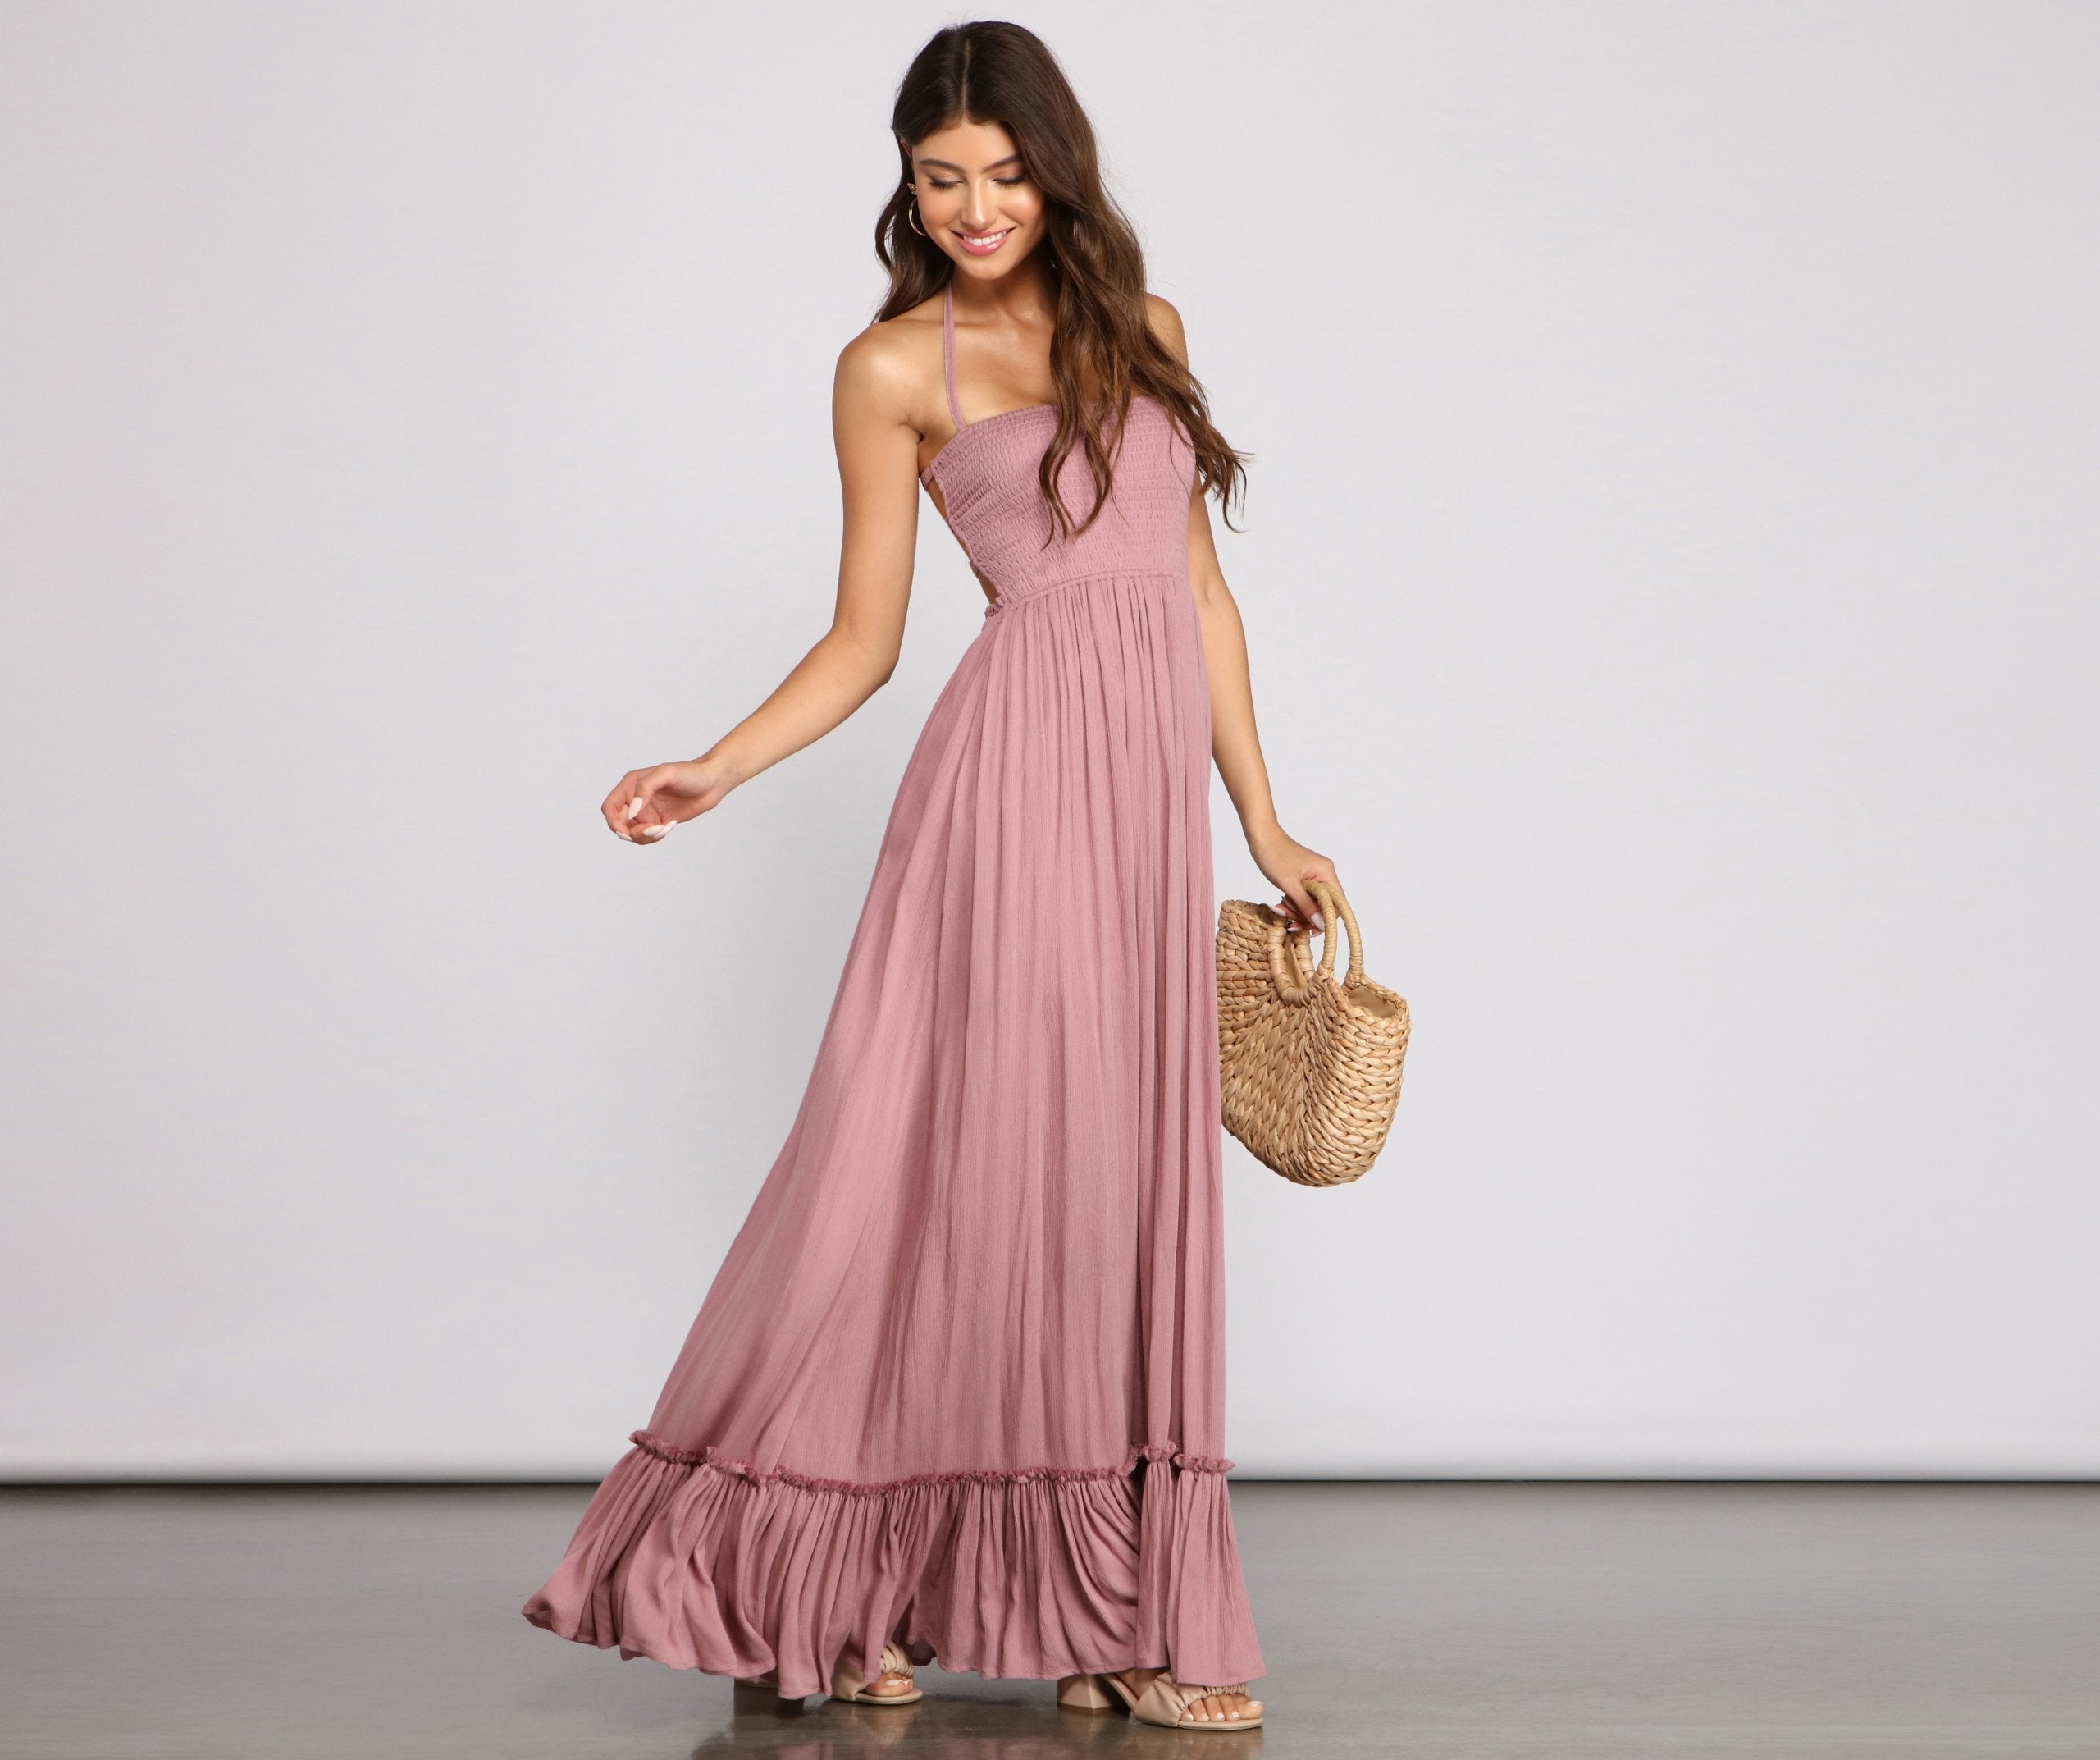 Go With The Flow Smocked Maxi Dress - Lady Occasions